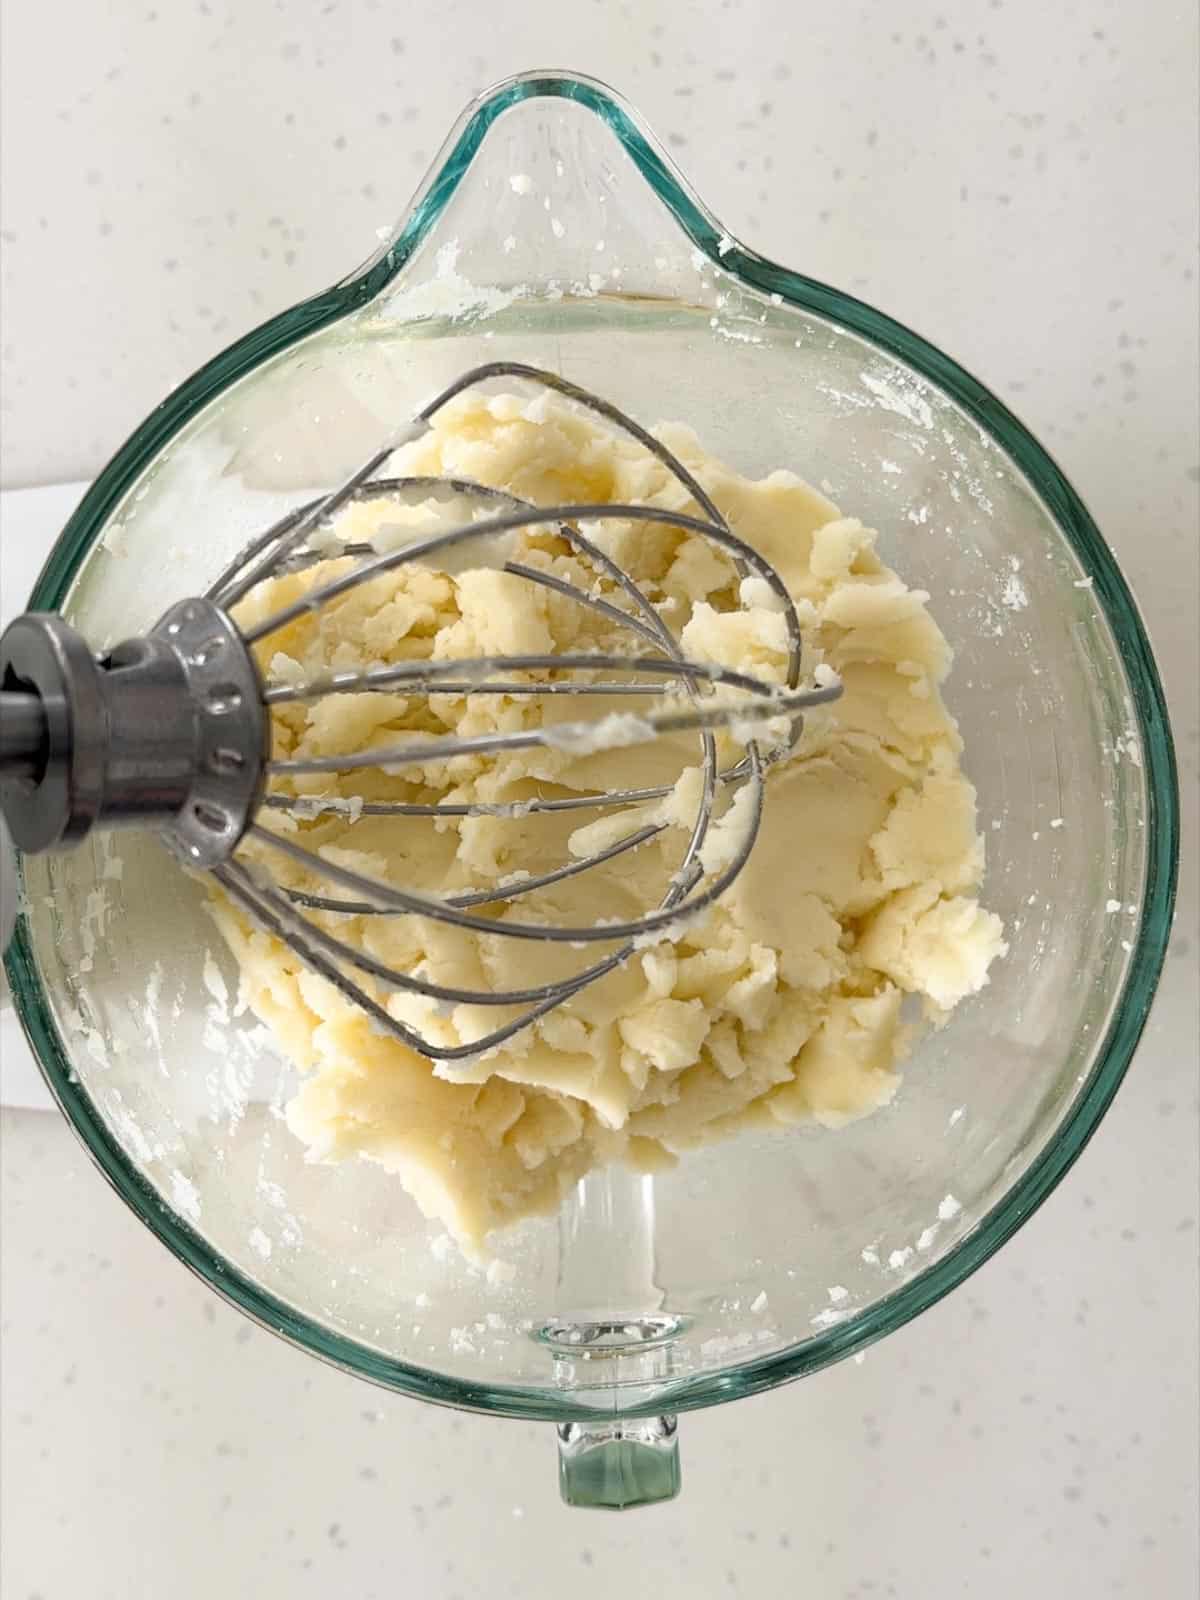 Mashed potatoes in a standing mixer with a whisk attachment.